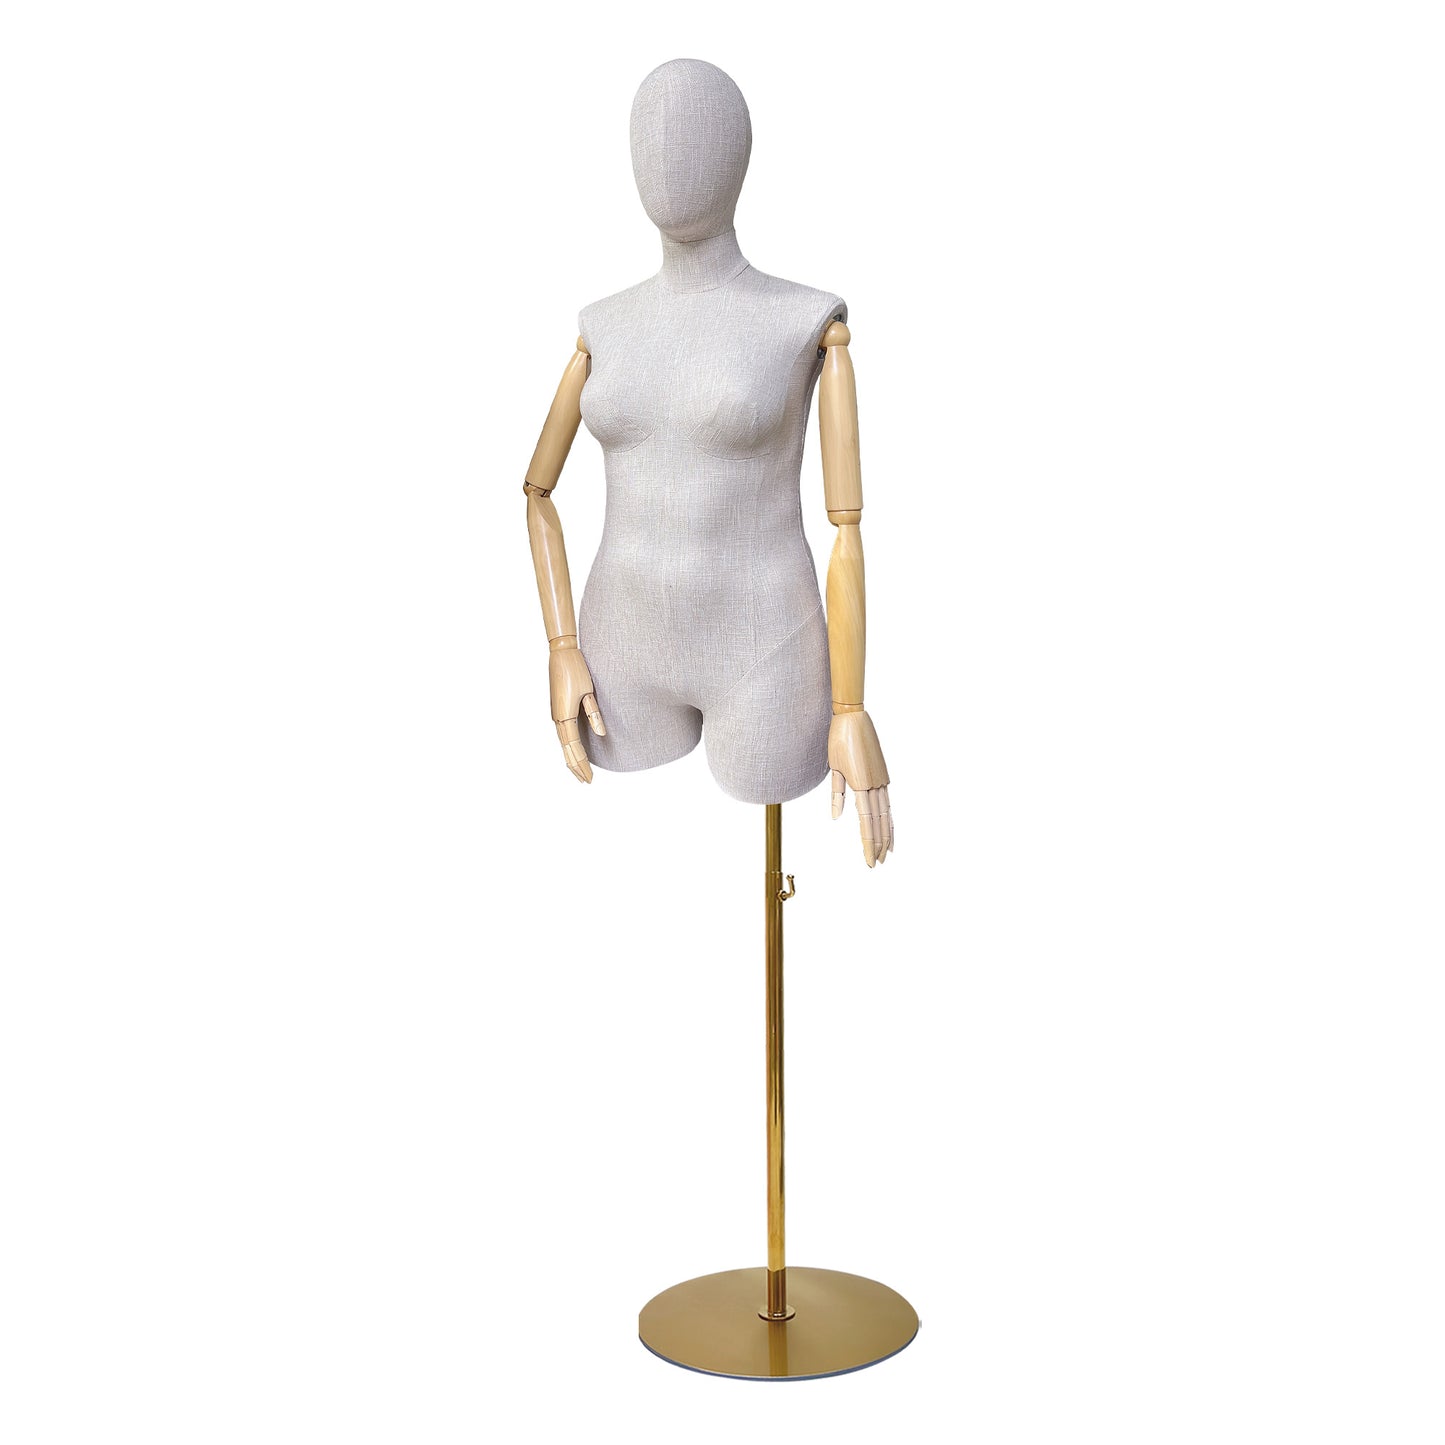 Adult Female Plus Size Torso Mannequin,Half Body Mannequin Torso,Bamboo Linen Fabric Clothing Dress Form,Adult Props with Wooden Arms,Mannequin for Cloth Window Display DE-LIANG